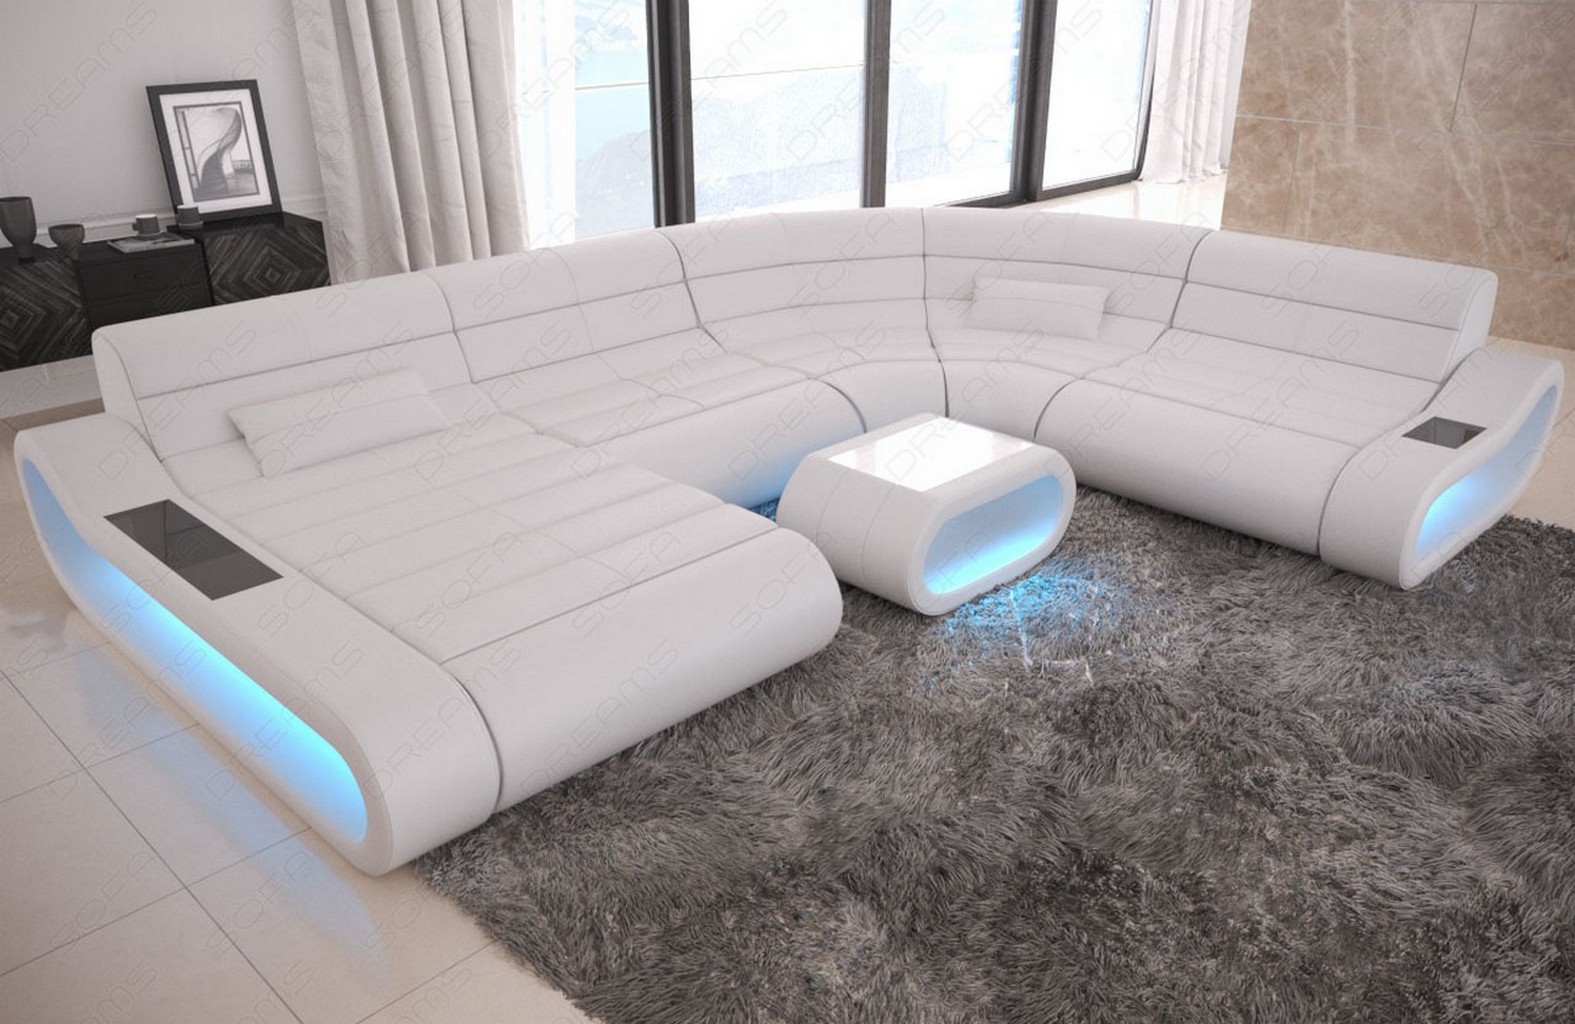 LUXURY SECTIONAL SOFA Concept XL Design Couch Big LED lights Ottoman ...